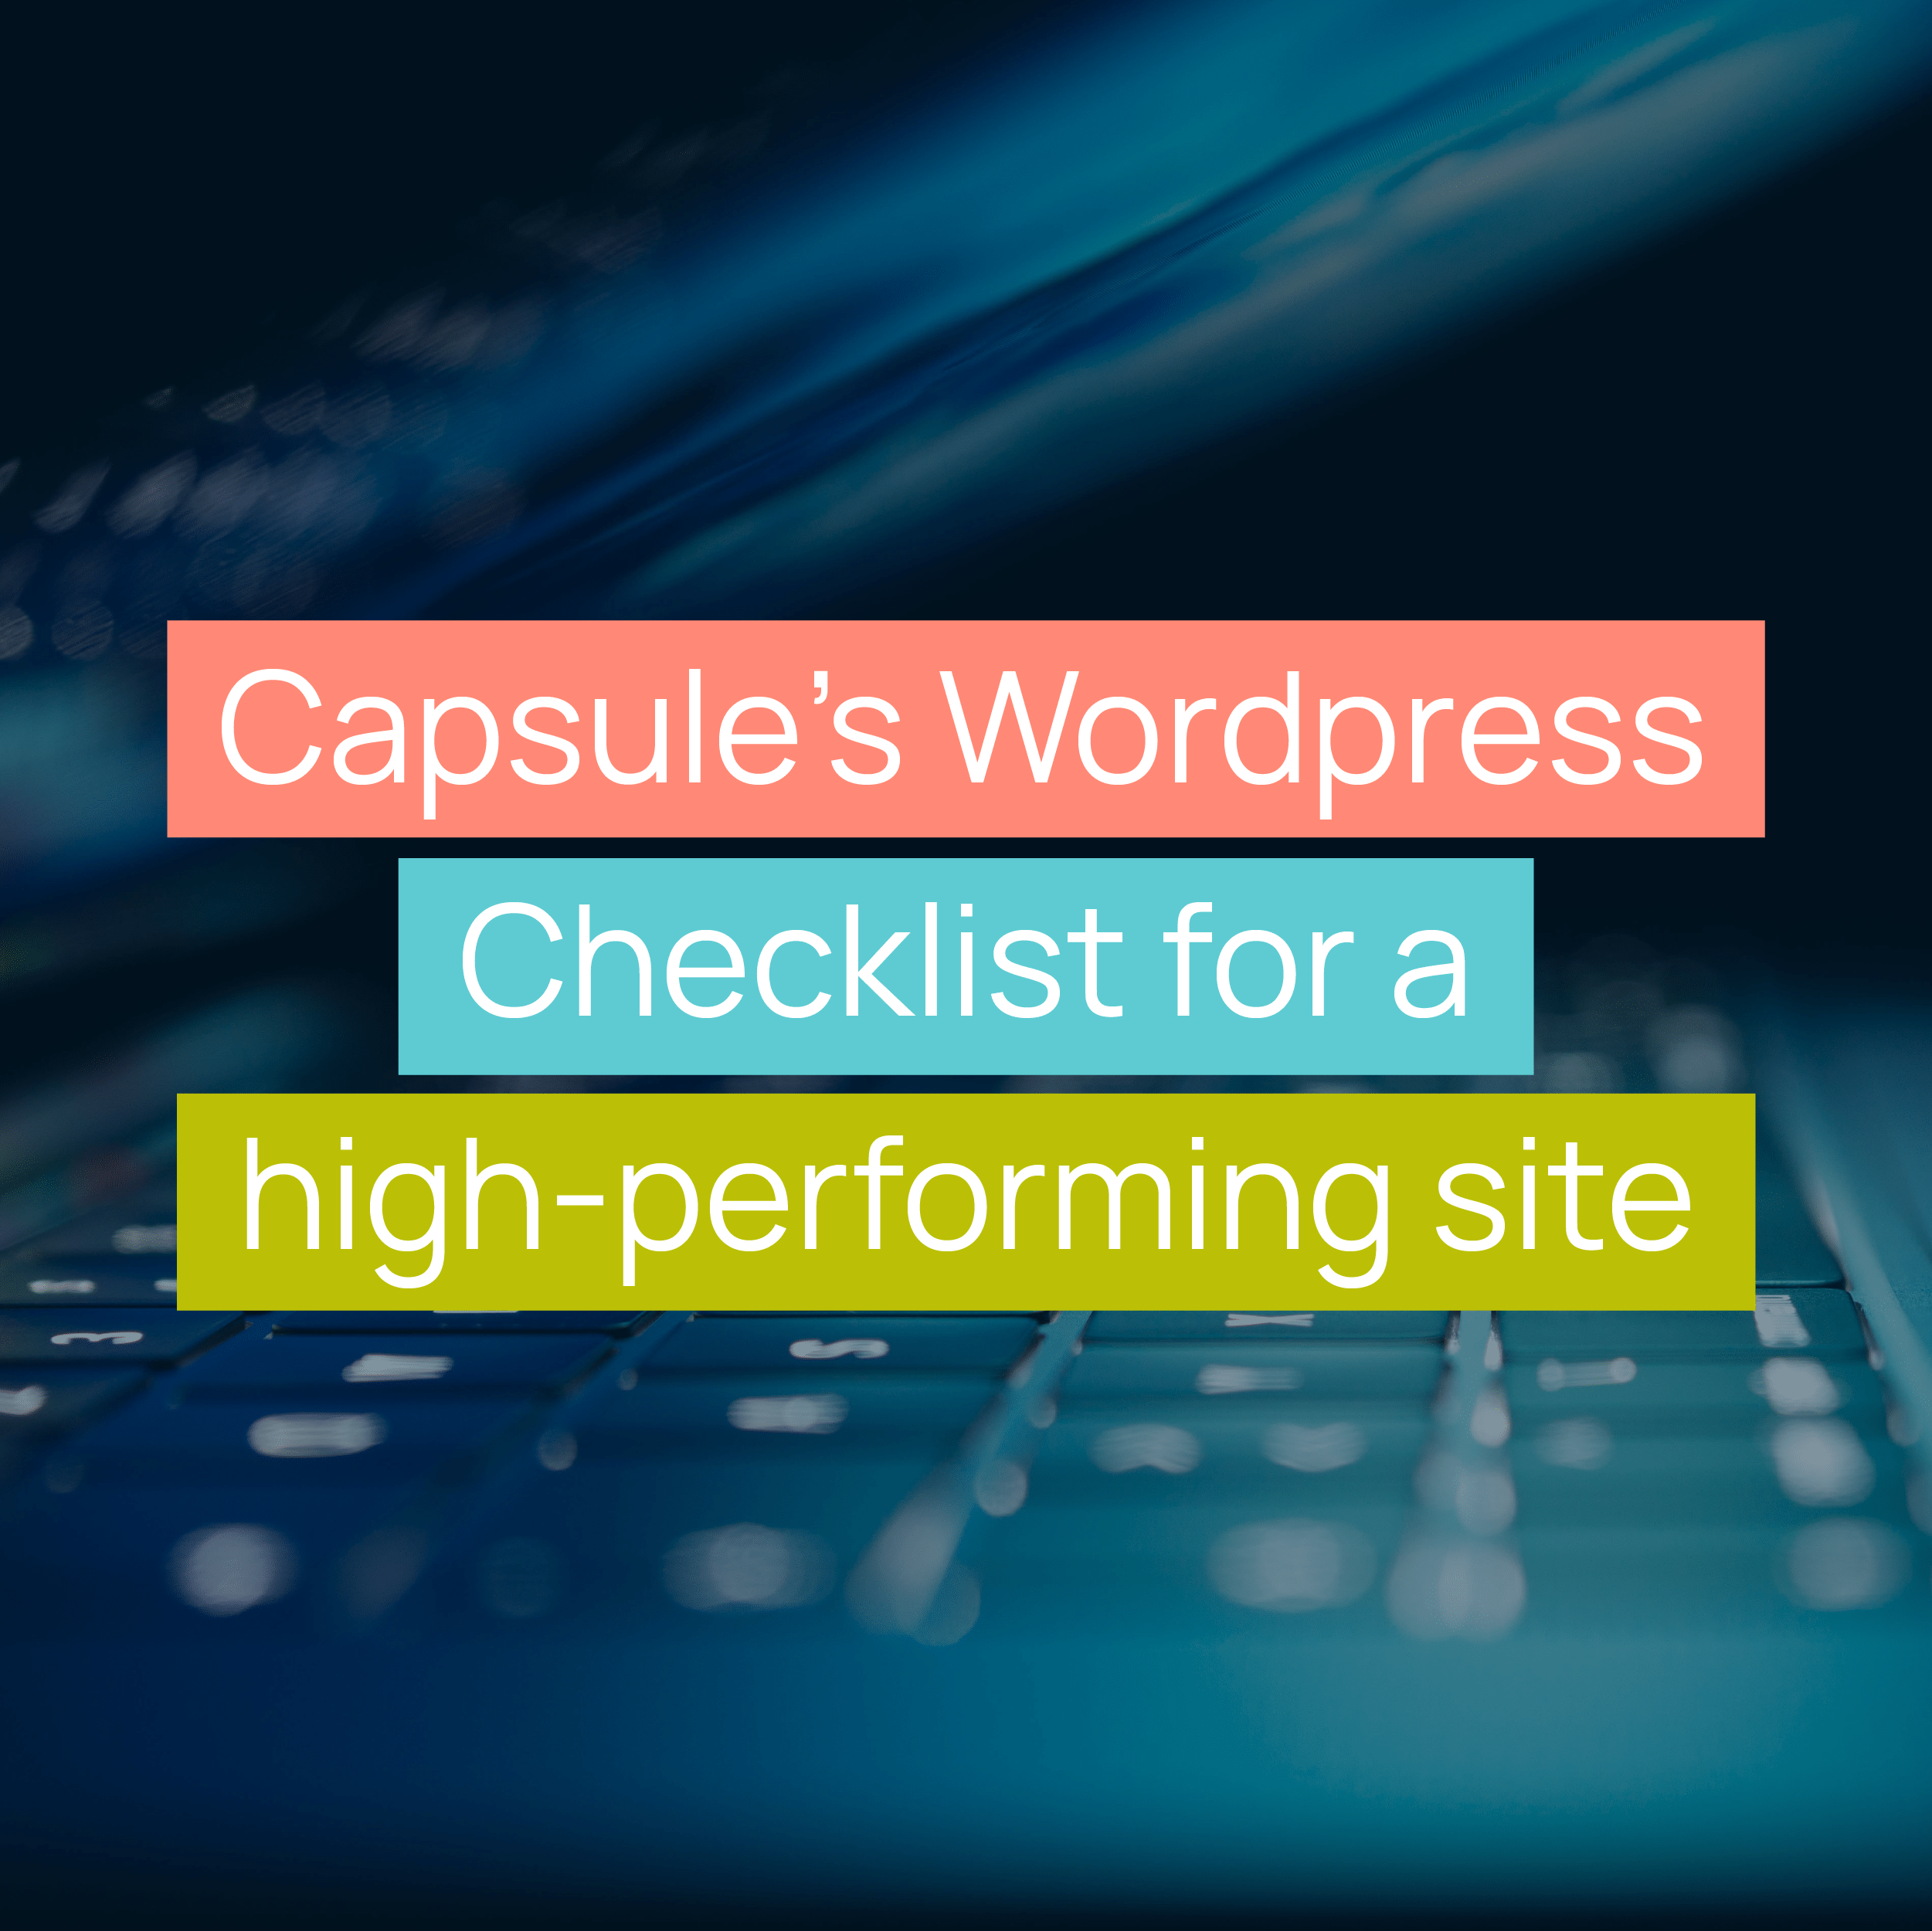 Capsule's WordPress Checklist for a high-performing site title image